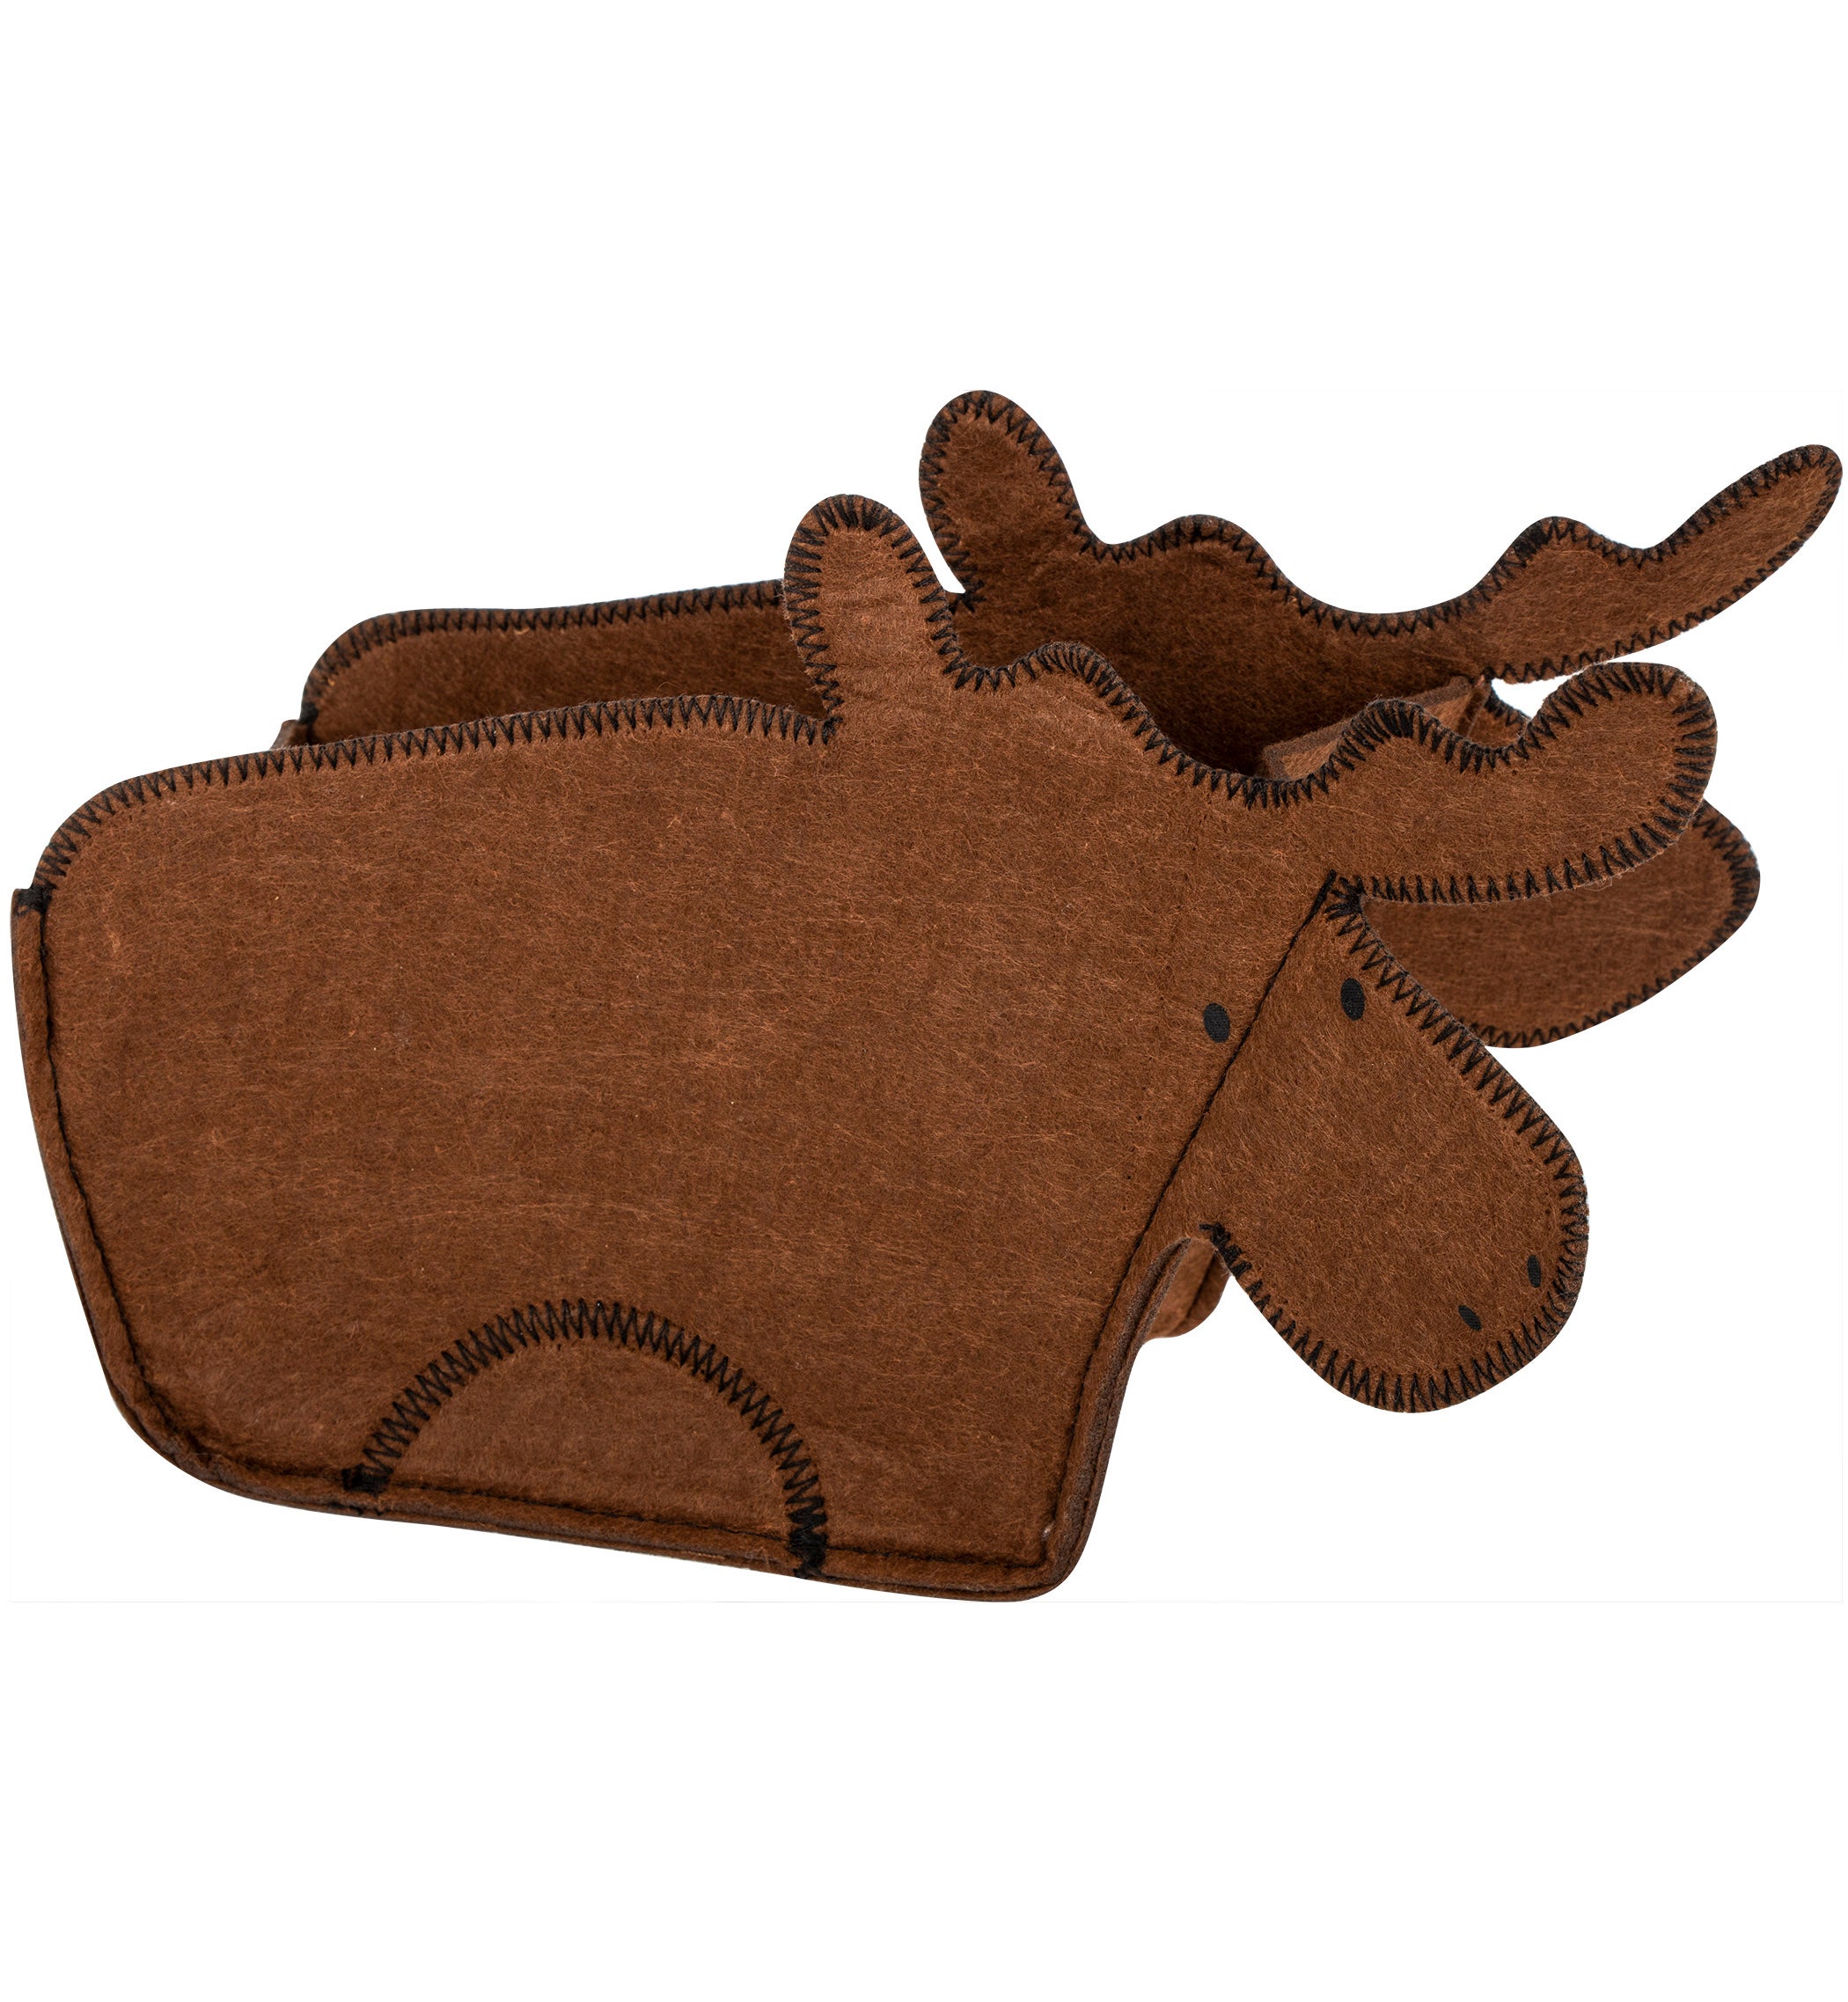 Welcome Baby Moose 5 Piece Shaped Gift Set